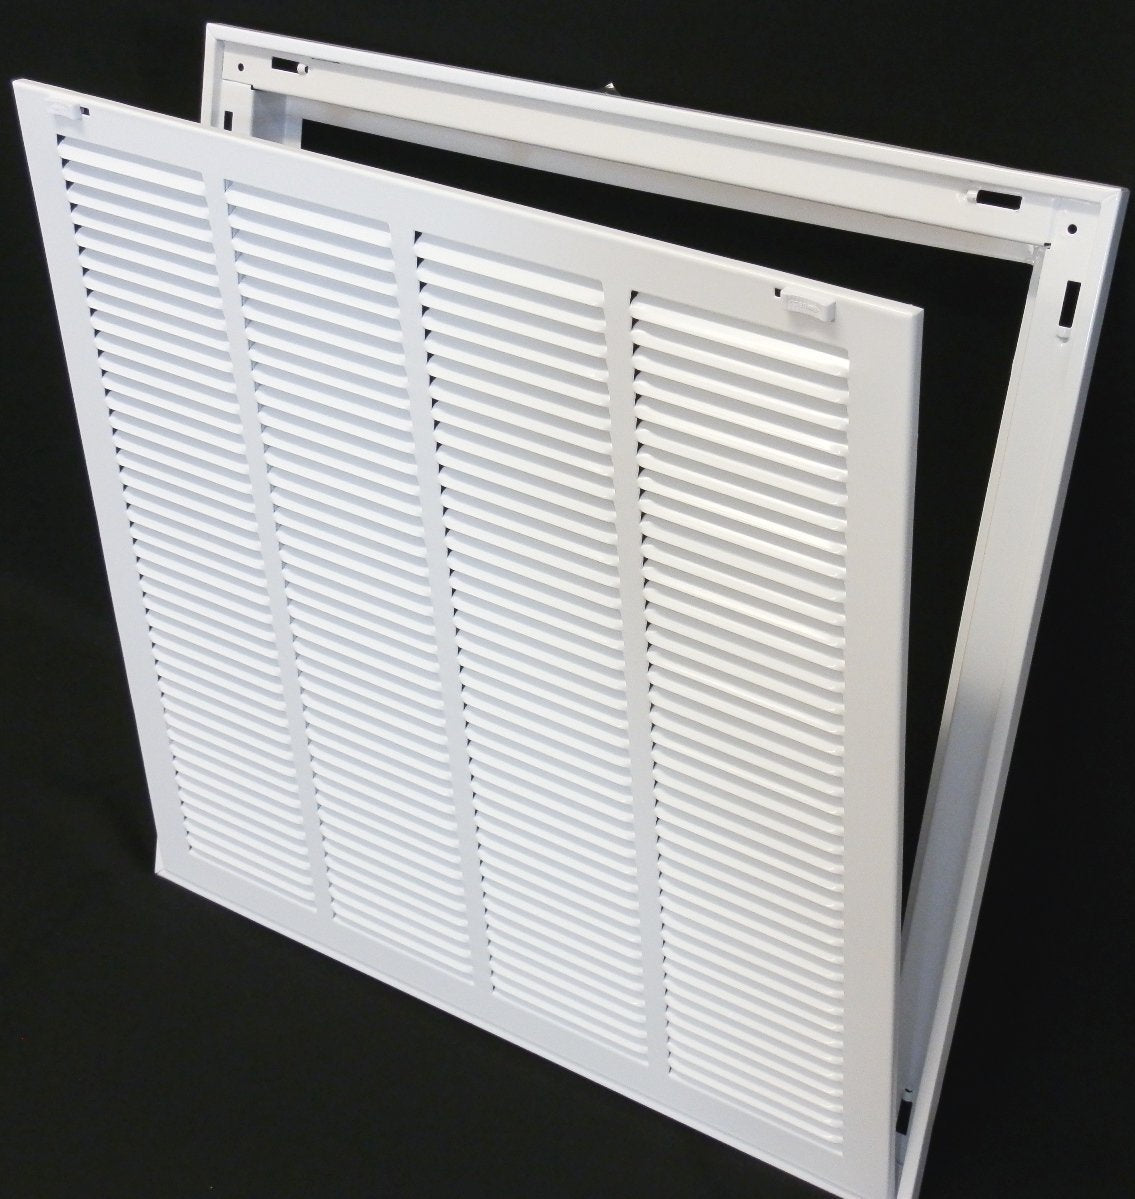 14&quot; X 32&quot; Steel Return Air Filter Grille for 1&quot; Filter - Removable Frame - [Outer Dimensions: 16 5/8&quot; X 34 5/8&quot;]